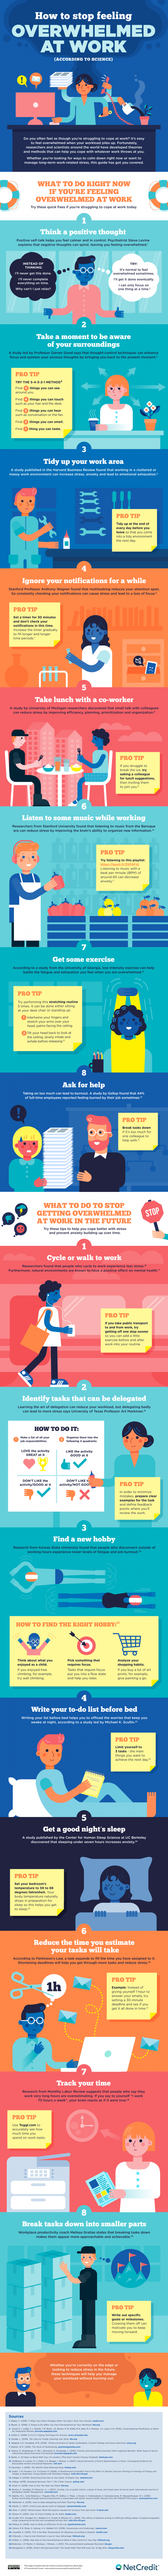 How to stop feeling overwhelmed at work infographic